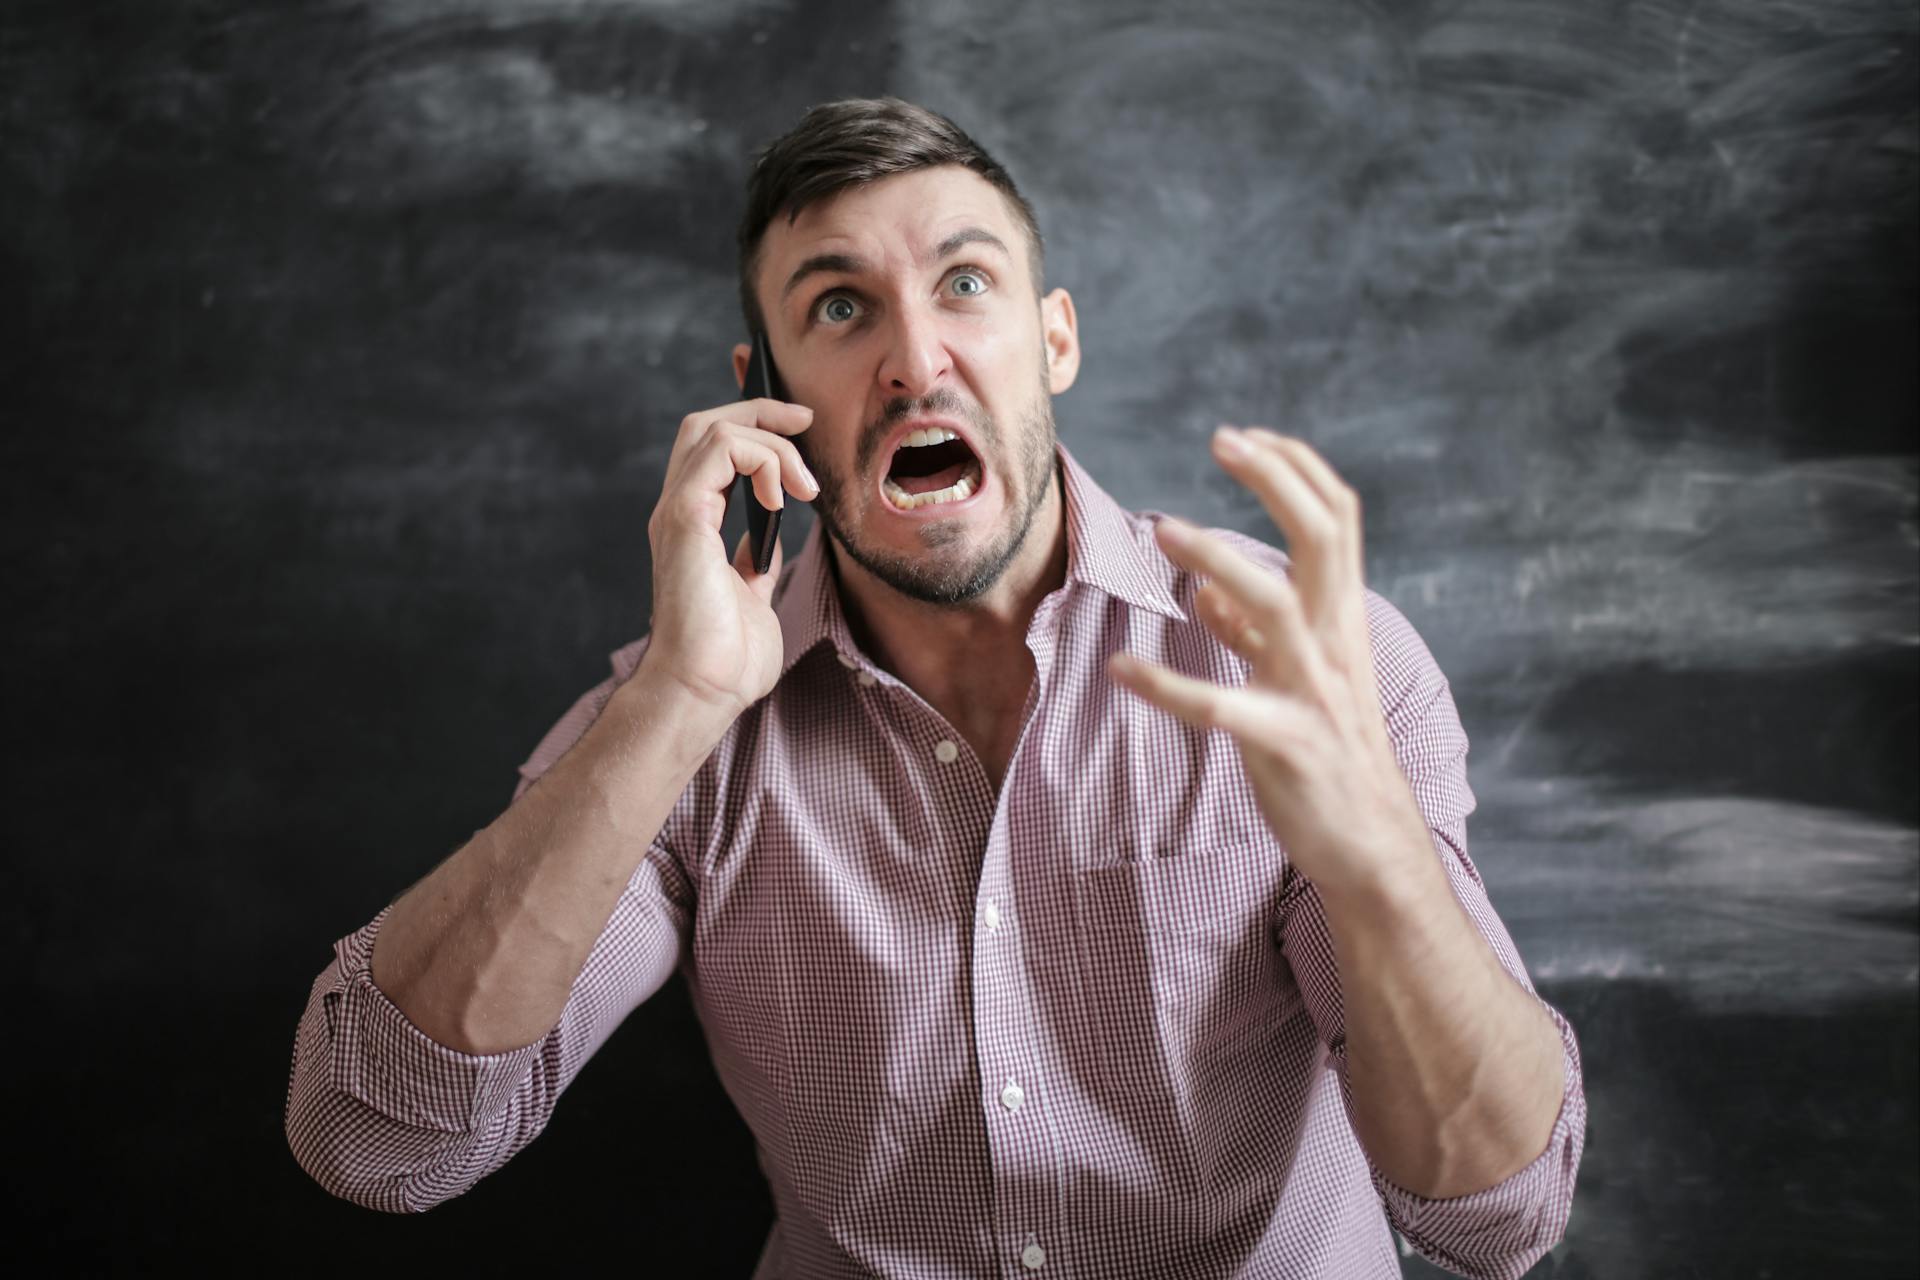 An angry man on the phone | Source: Pexels